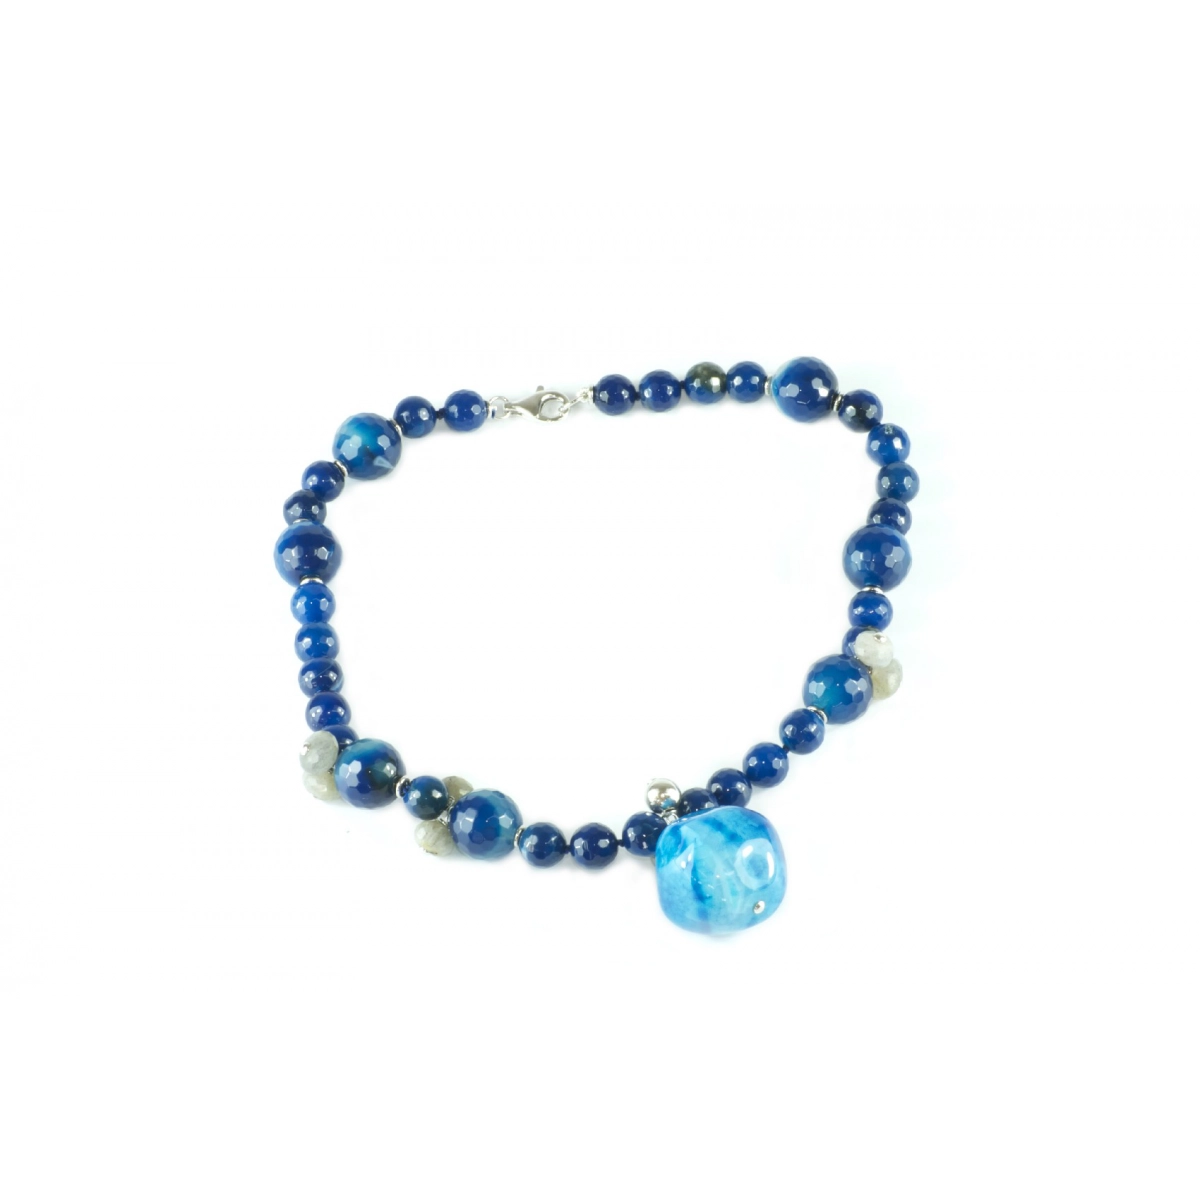 COLLAR SHORT KNOTTED BLUE AGATE WITH PENDANTS OF LABRADORITE C226 PATRICIA GARCIA